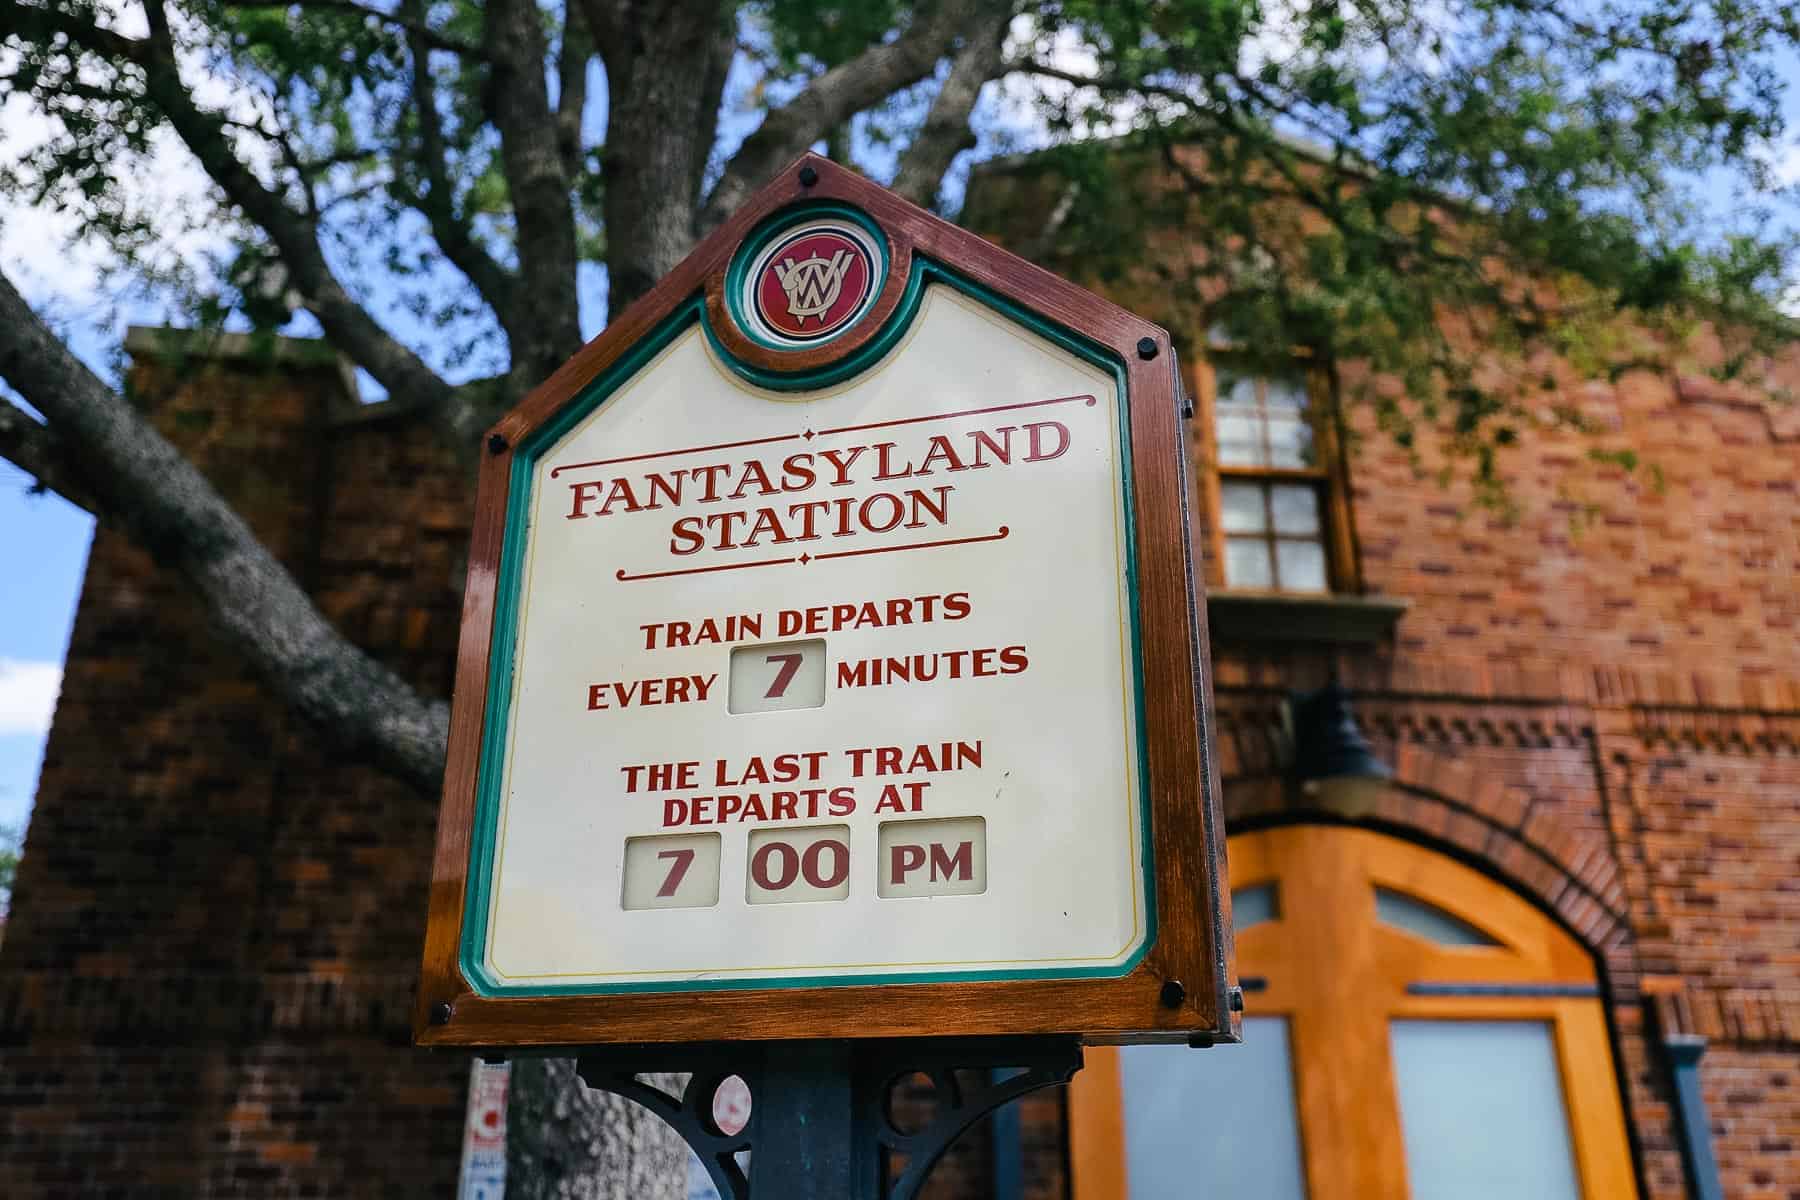 Schedule for Fantasyland Station says Train Departs every 7 minutes and the last train departs at 7:00 p.m. 